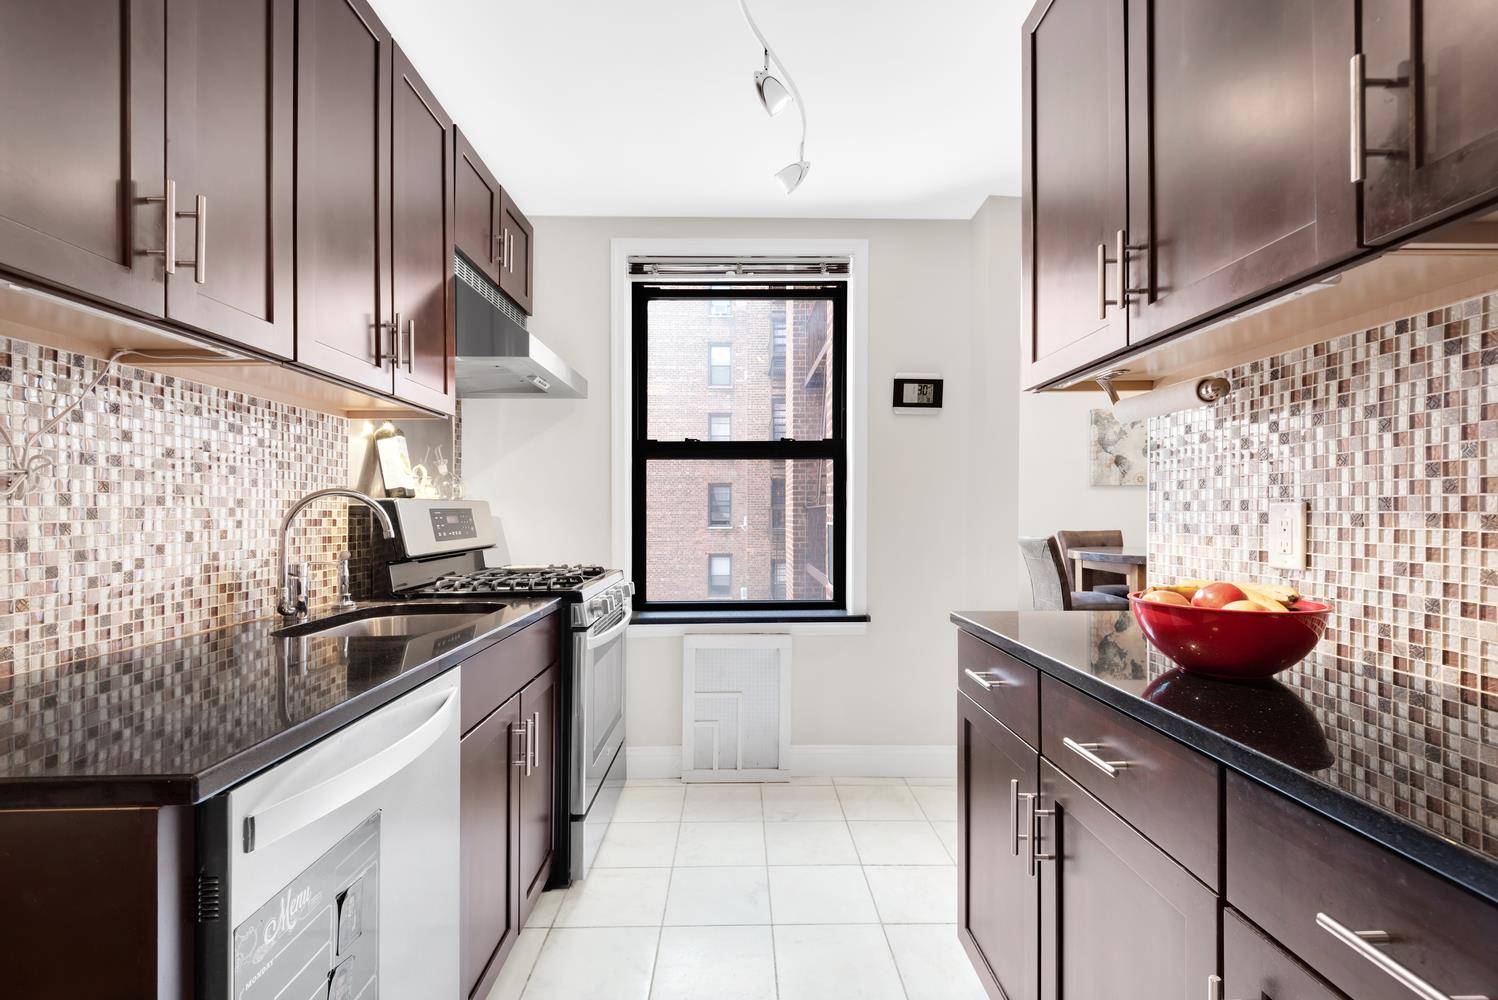 Beautifully renovated and quite spacious, residence 315 at the beautiful doorman building of 9511 Shore Road is the perfect solution for comfort, luxury and affordability along the Bay Ridge Waterfront.